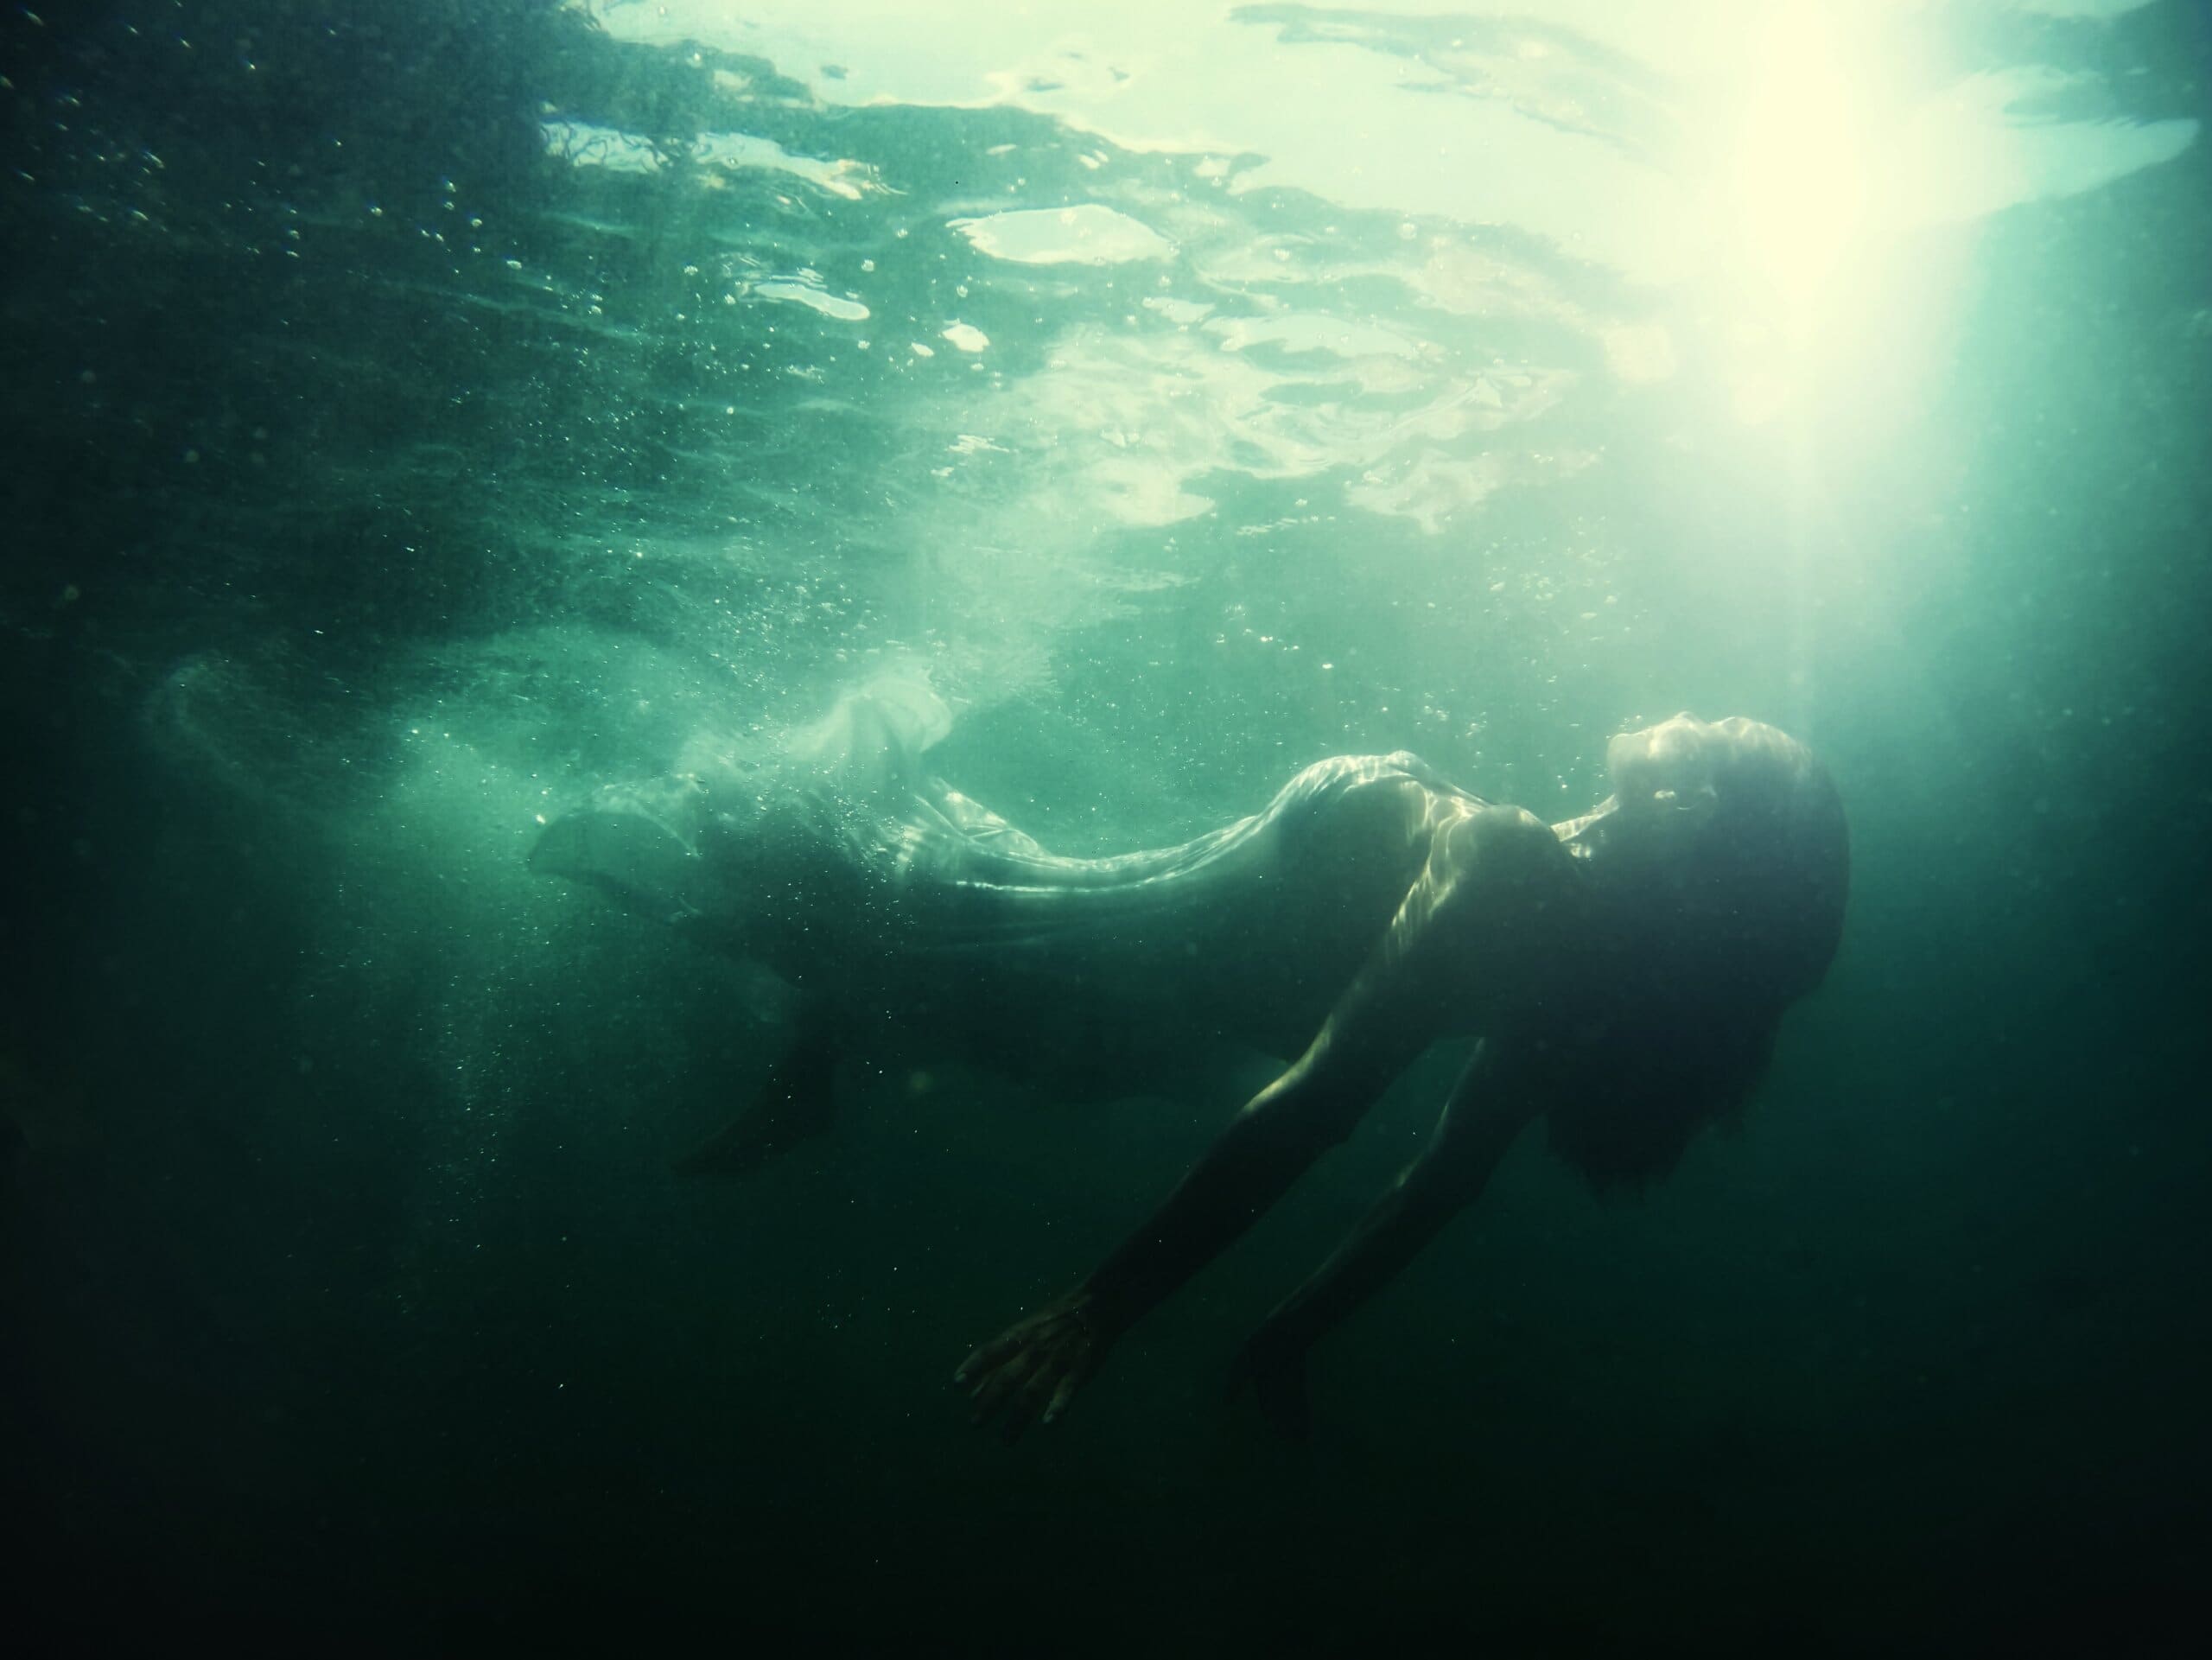 Woman floating underwater in a long white dress. Depiction of drowning.